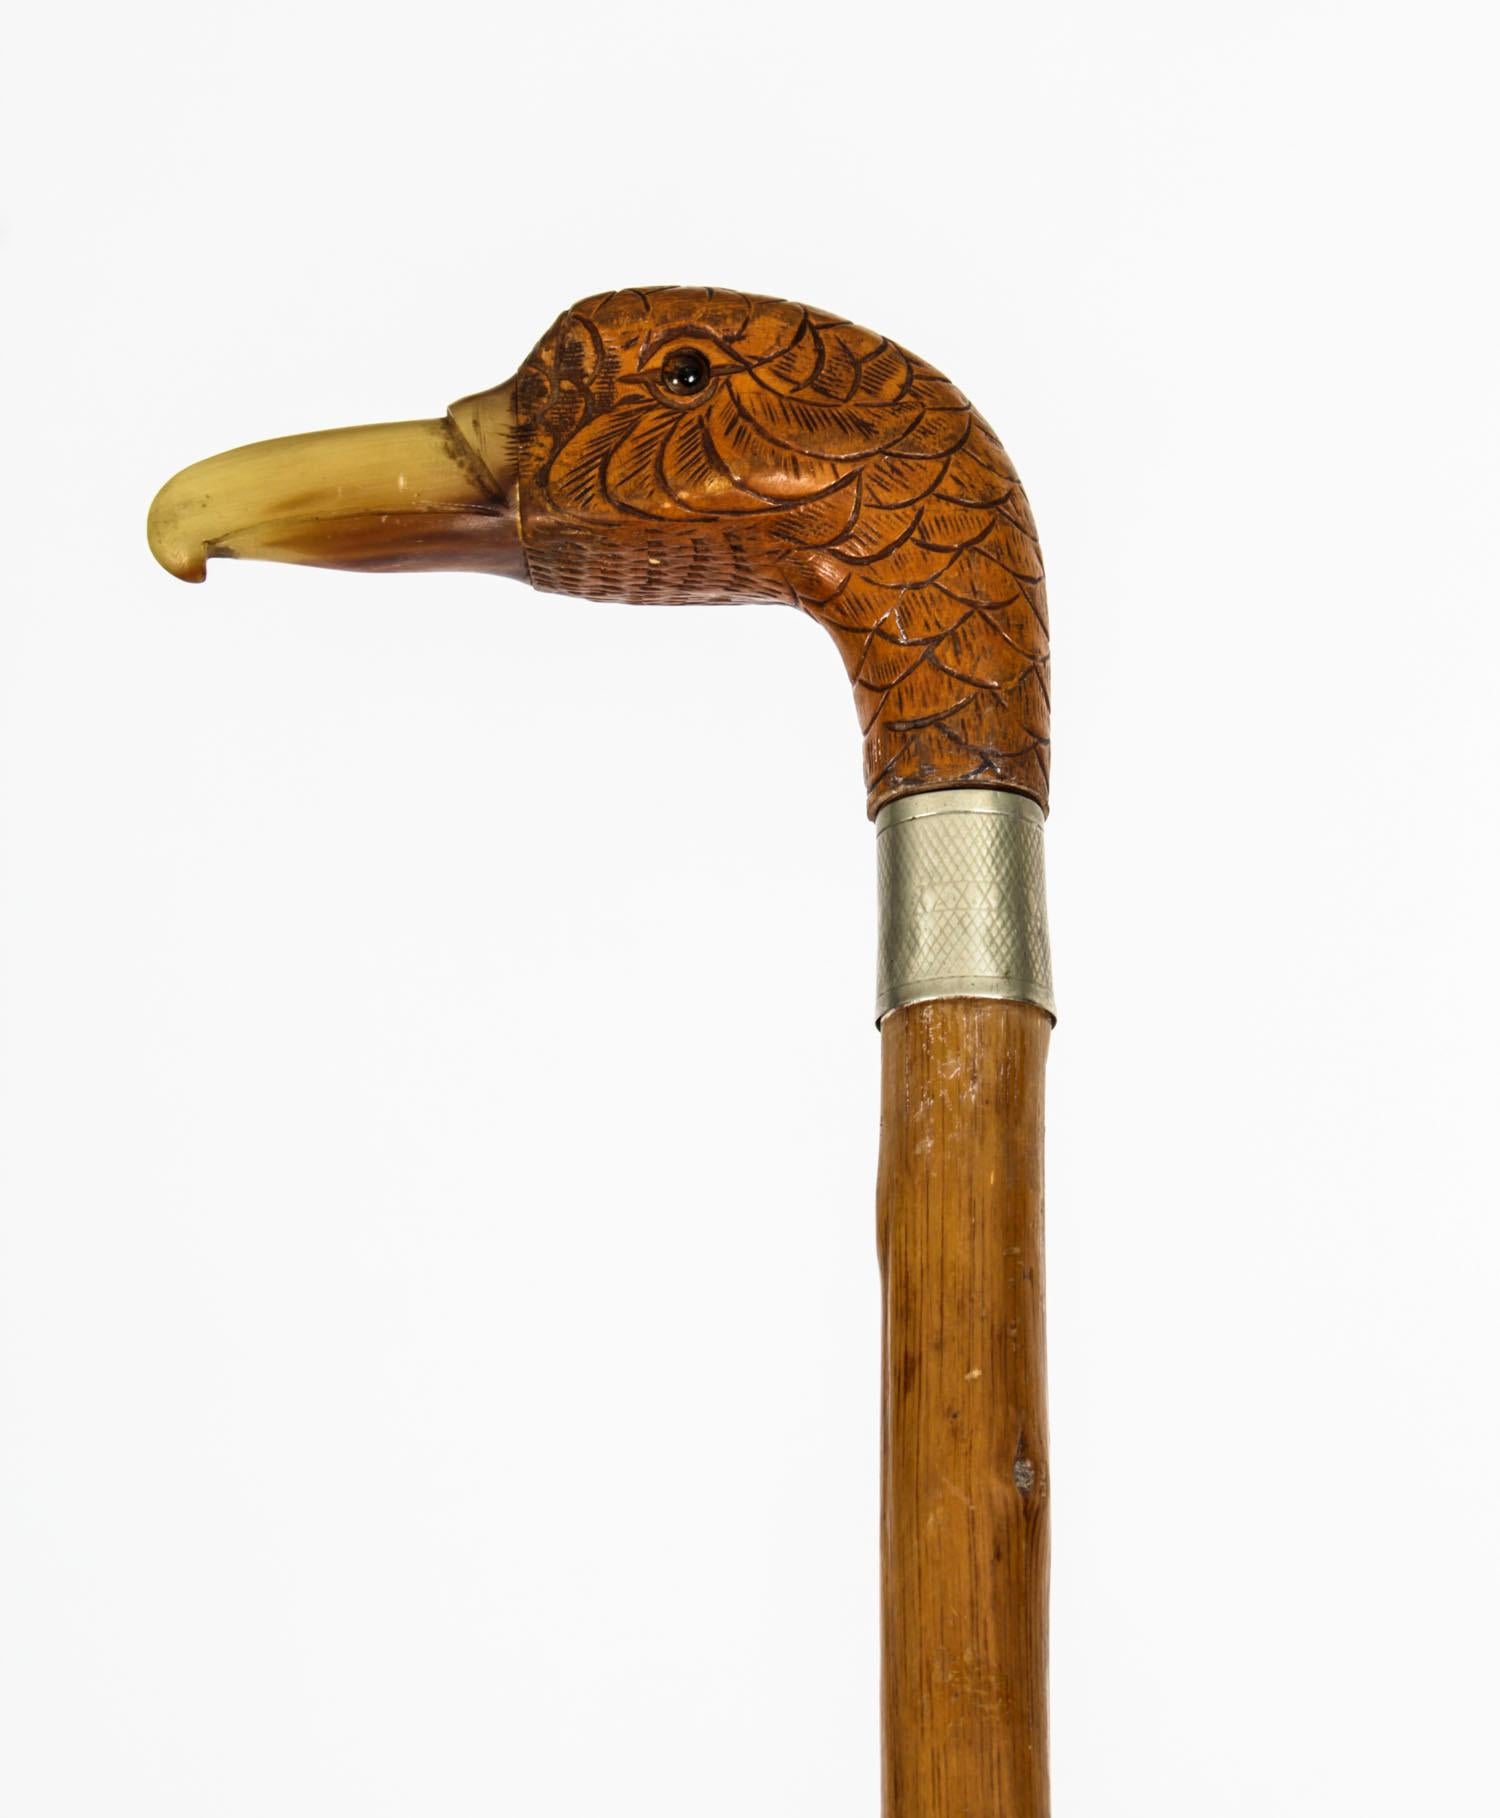 This is a beautiful antique English carved duck head handle walking stick, circa 1880 in date.
 
This charming walking cane features a splendid carved walnut duck head handle with detailed feathers, a horned bill and glass eyes with a silver band